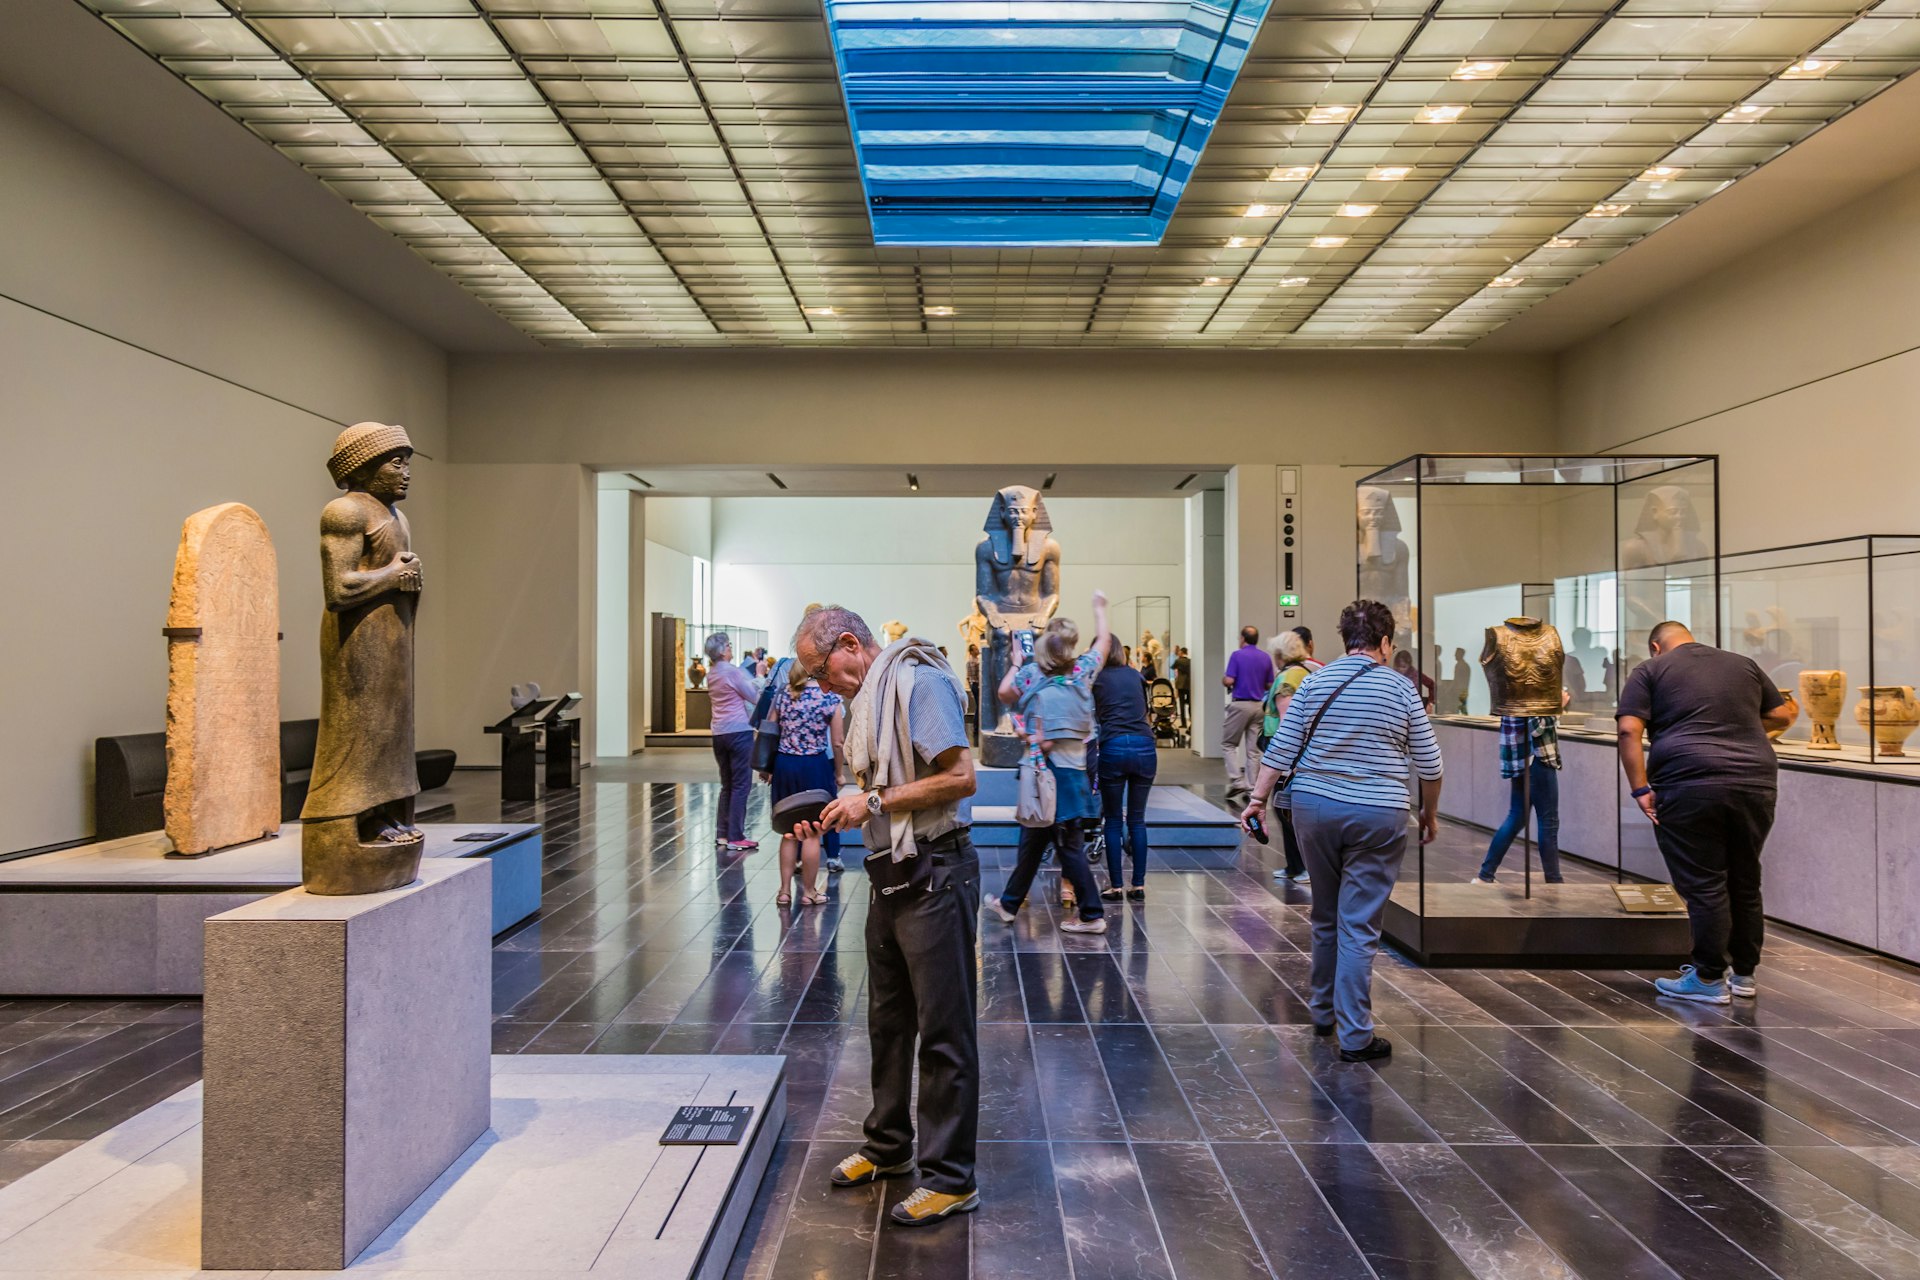 Visitors looking at exhibits in the 2nd Gallery of the Louvre Abu Dhabi, dedicated to The First Great Powers.